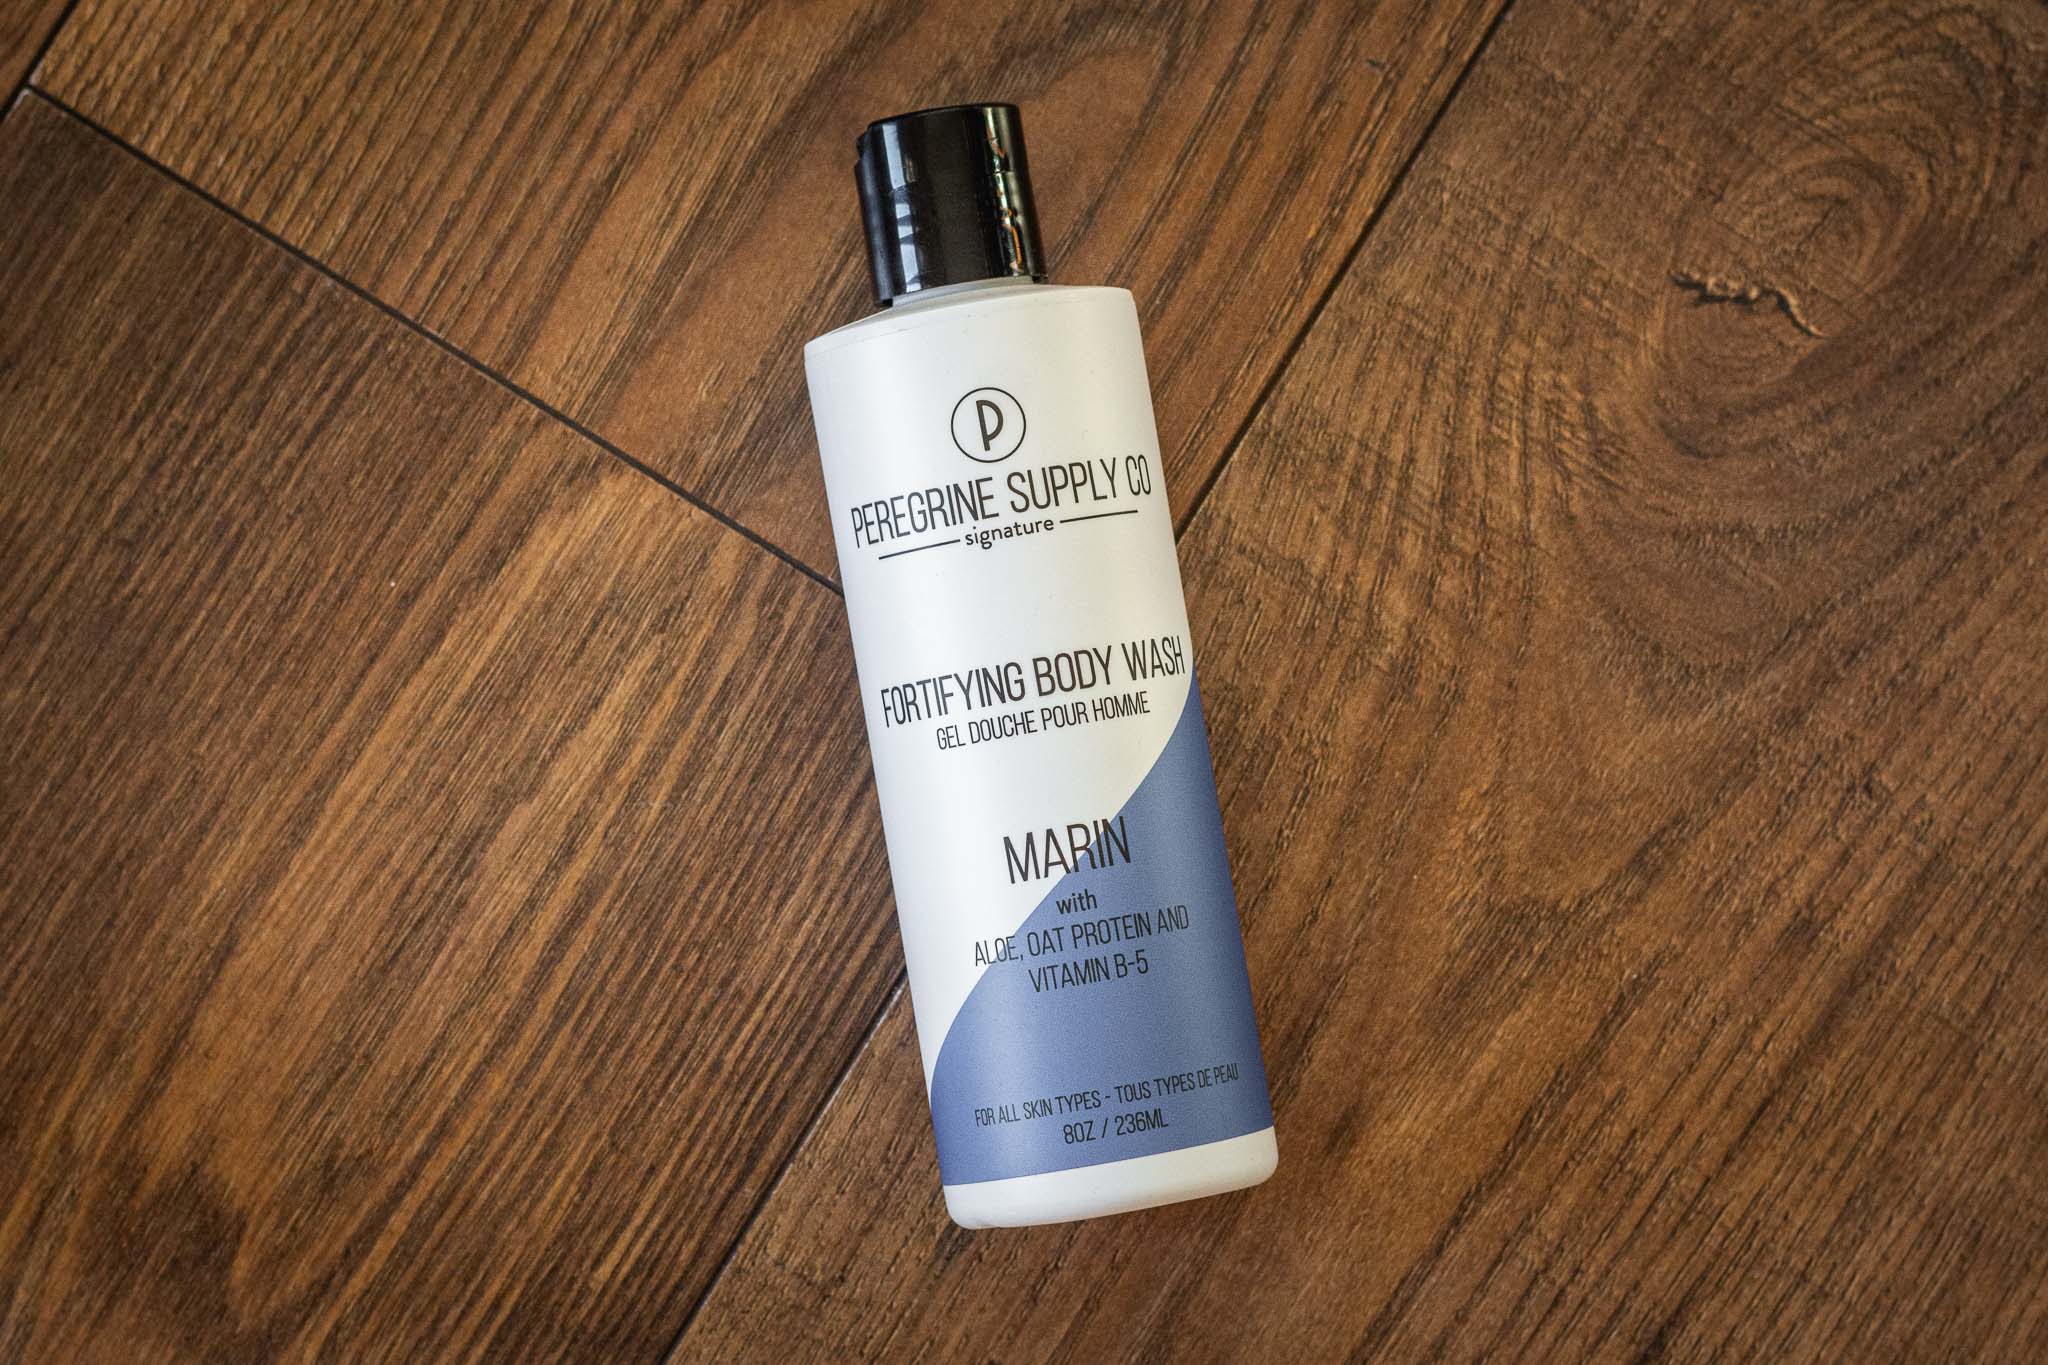 Fortifying Body Wash by Peregrine Supply Co